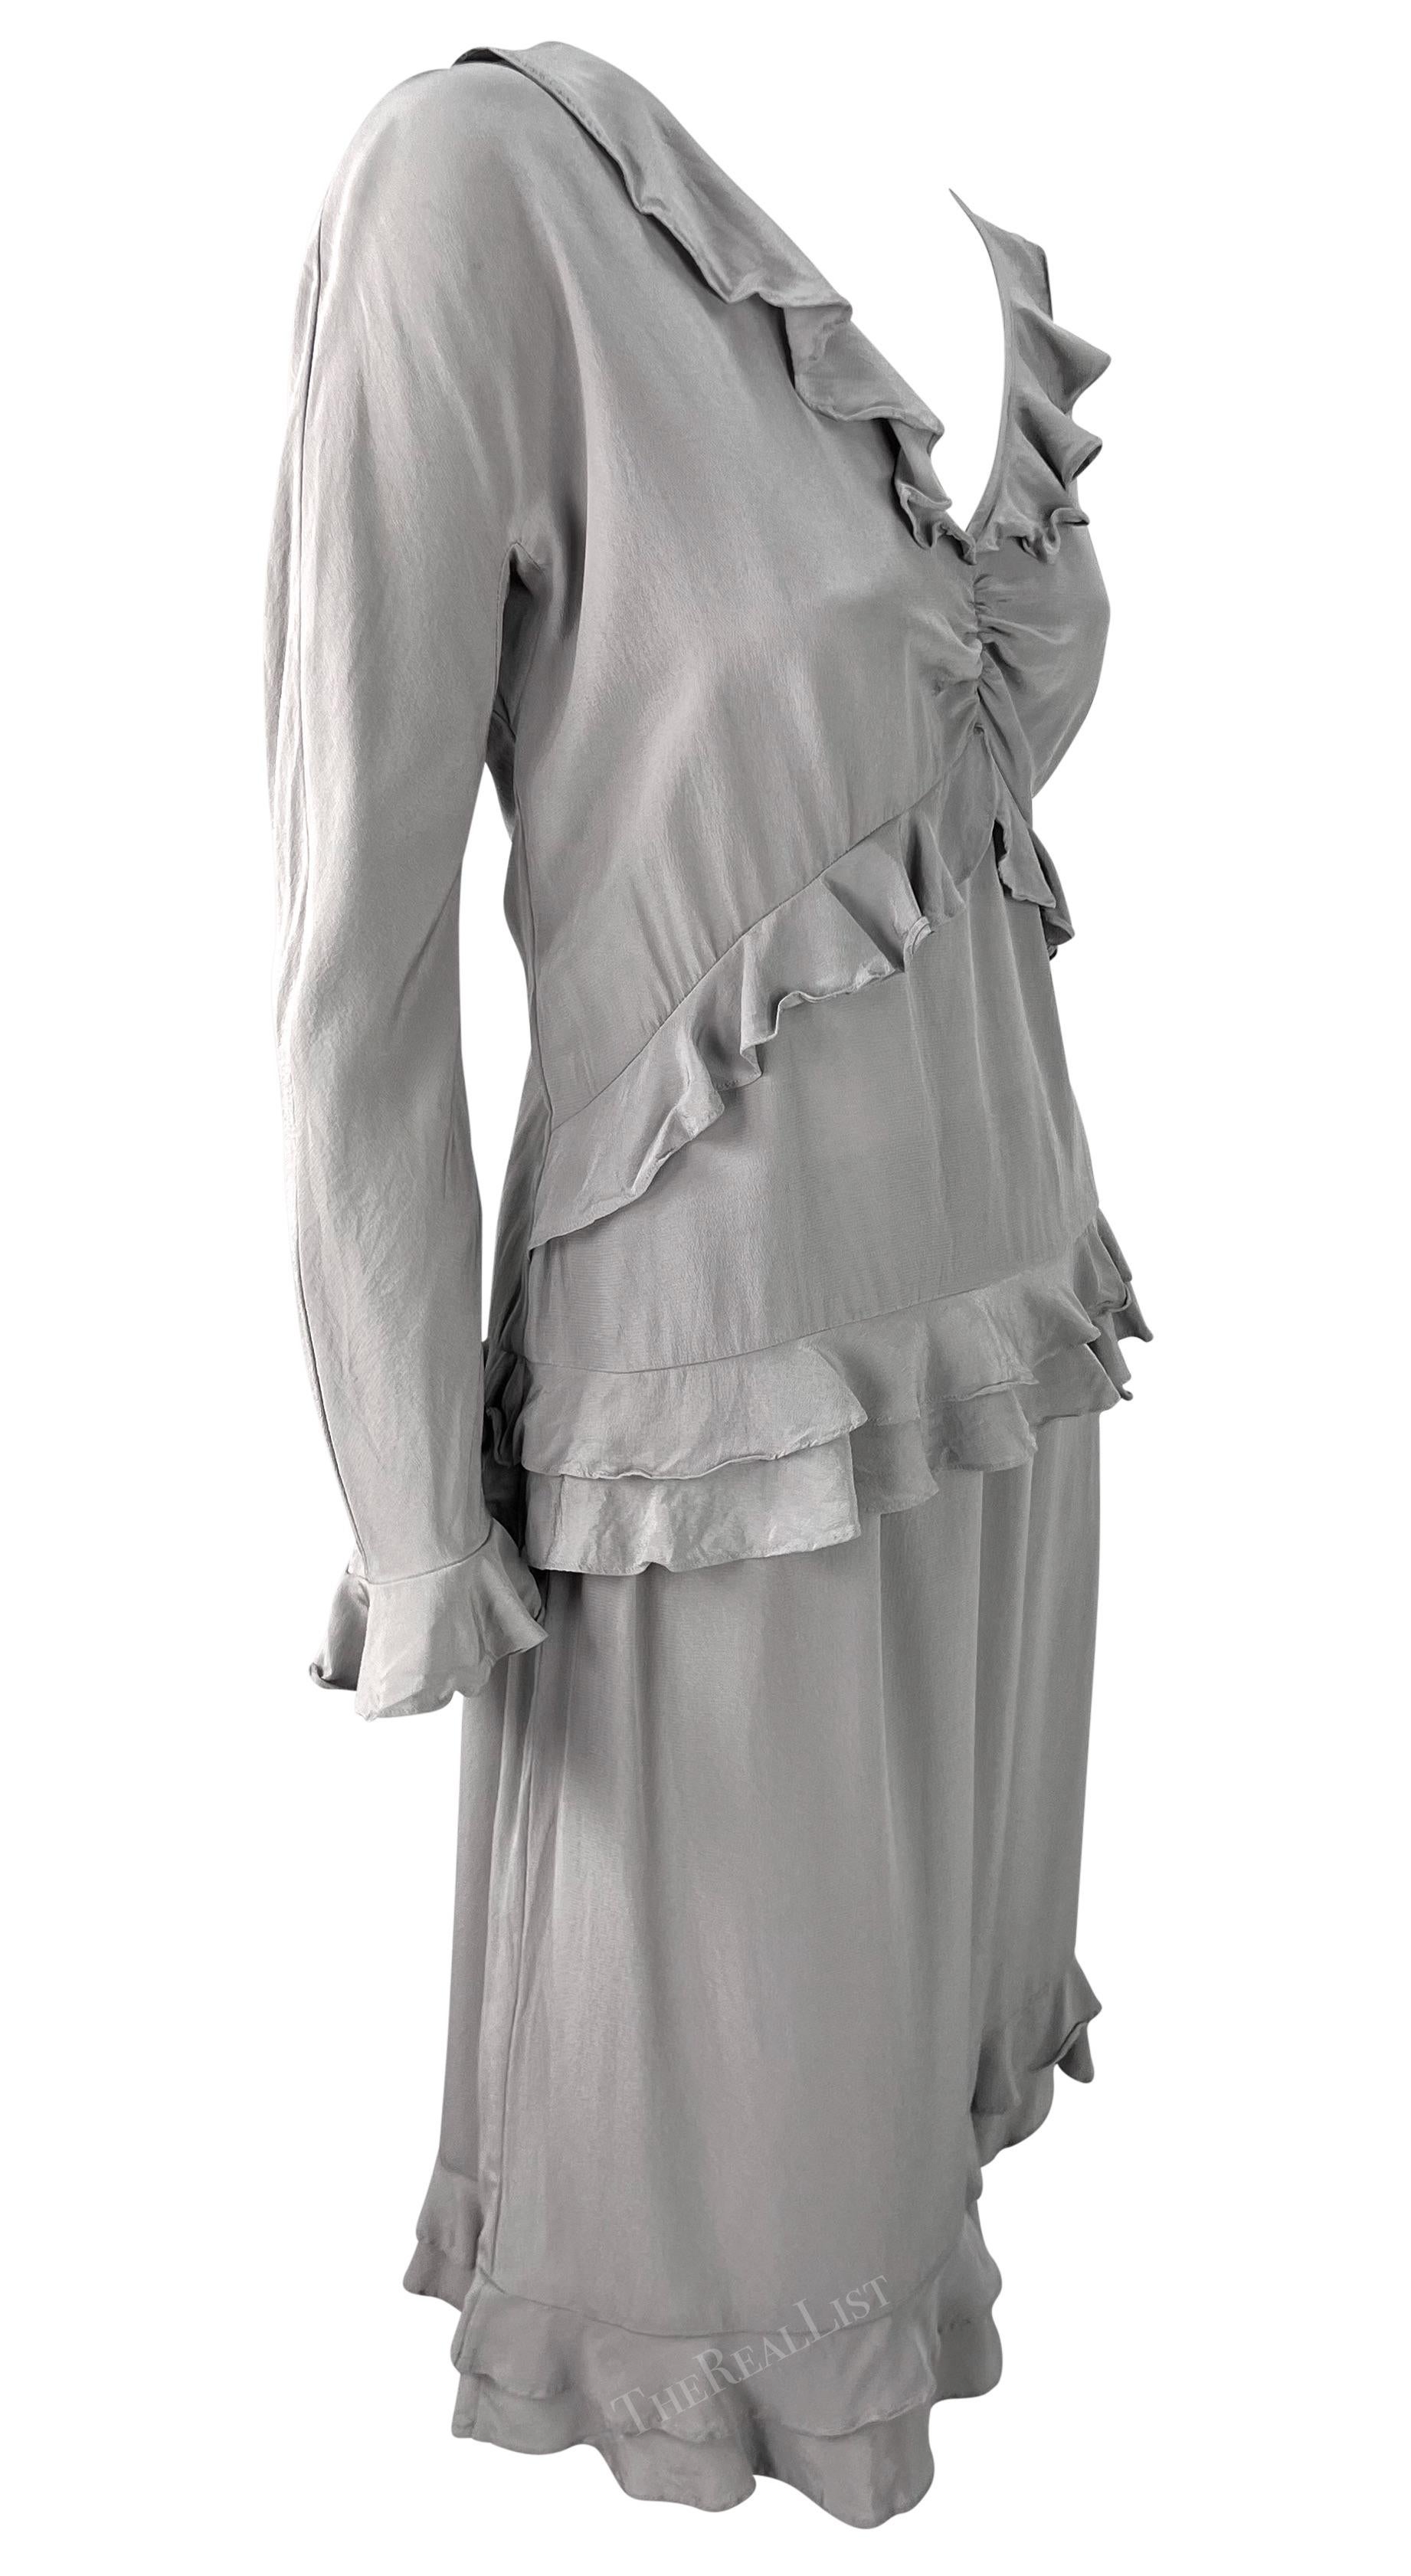 S/S 1999 Gucci by Tom Ford Ruffled Grey Silk Long Sleeve Top Skirt Set For Sale 2